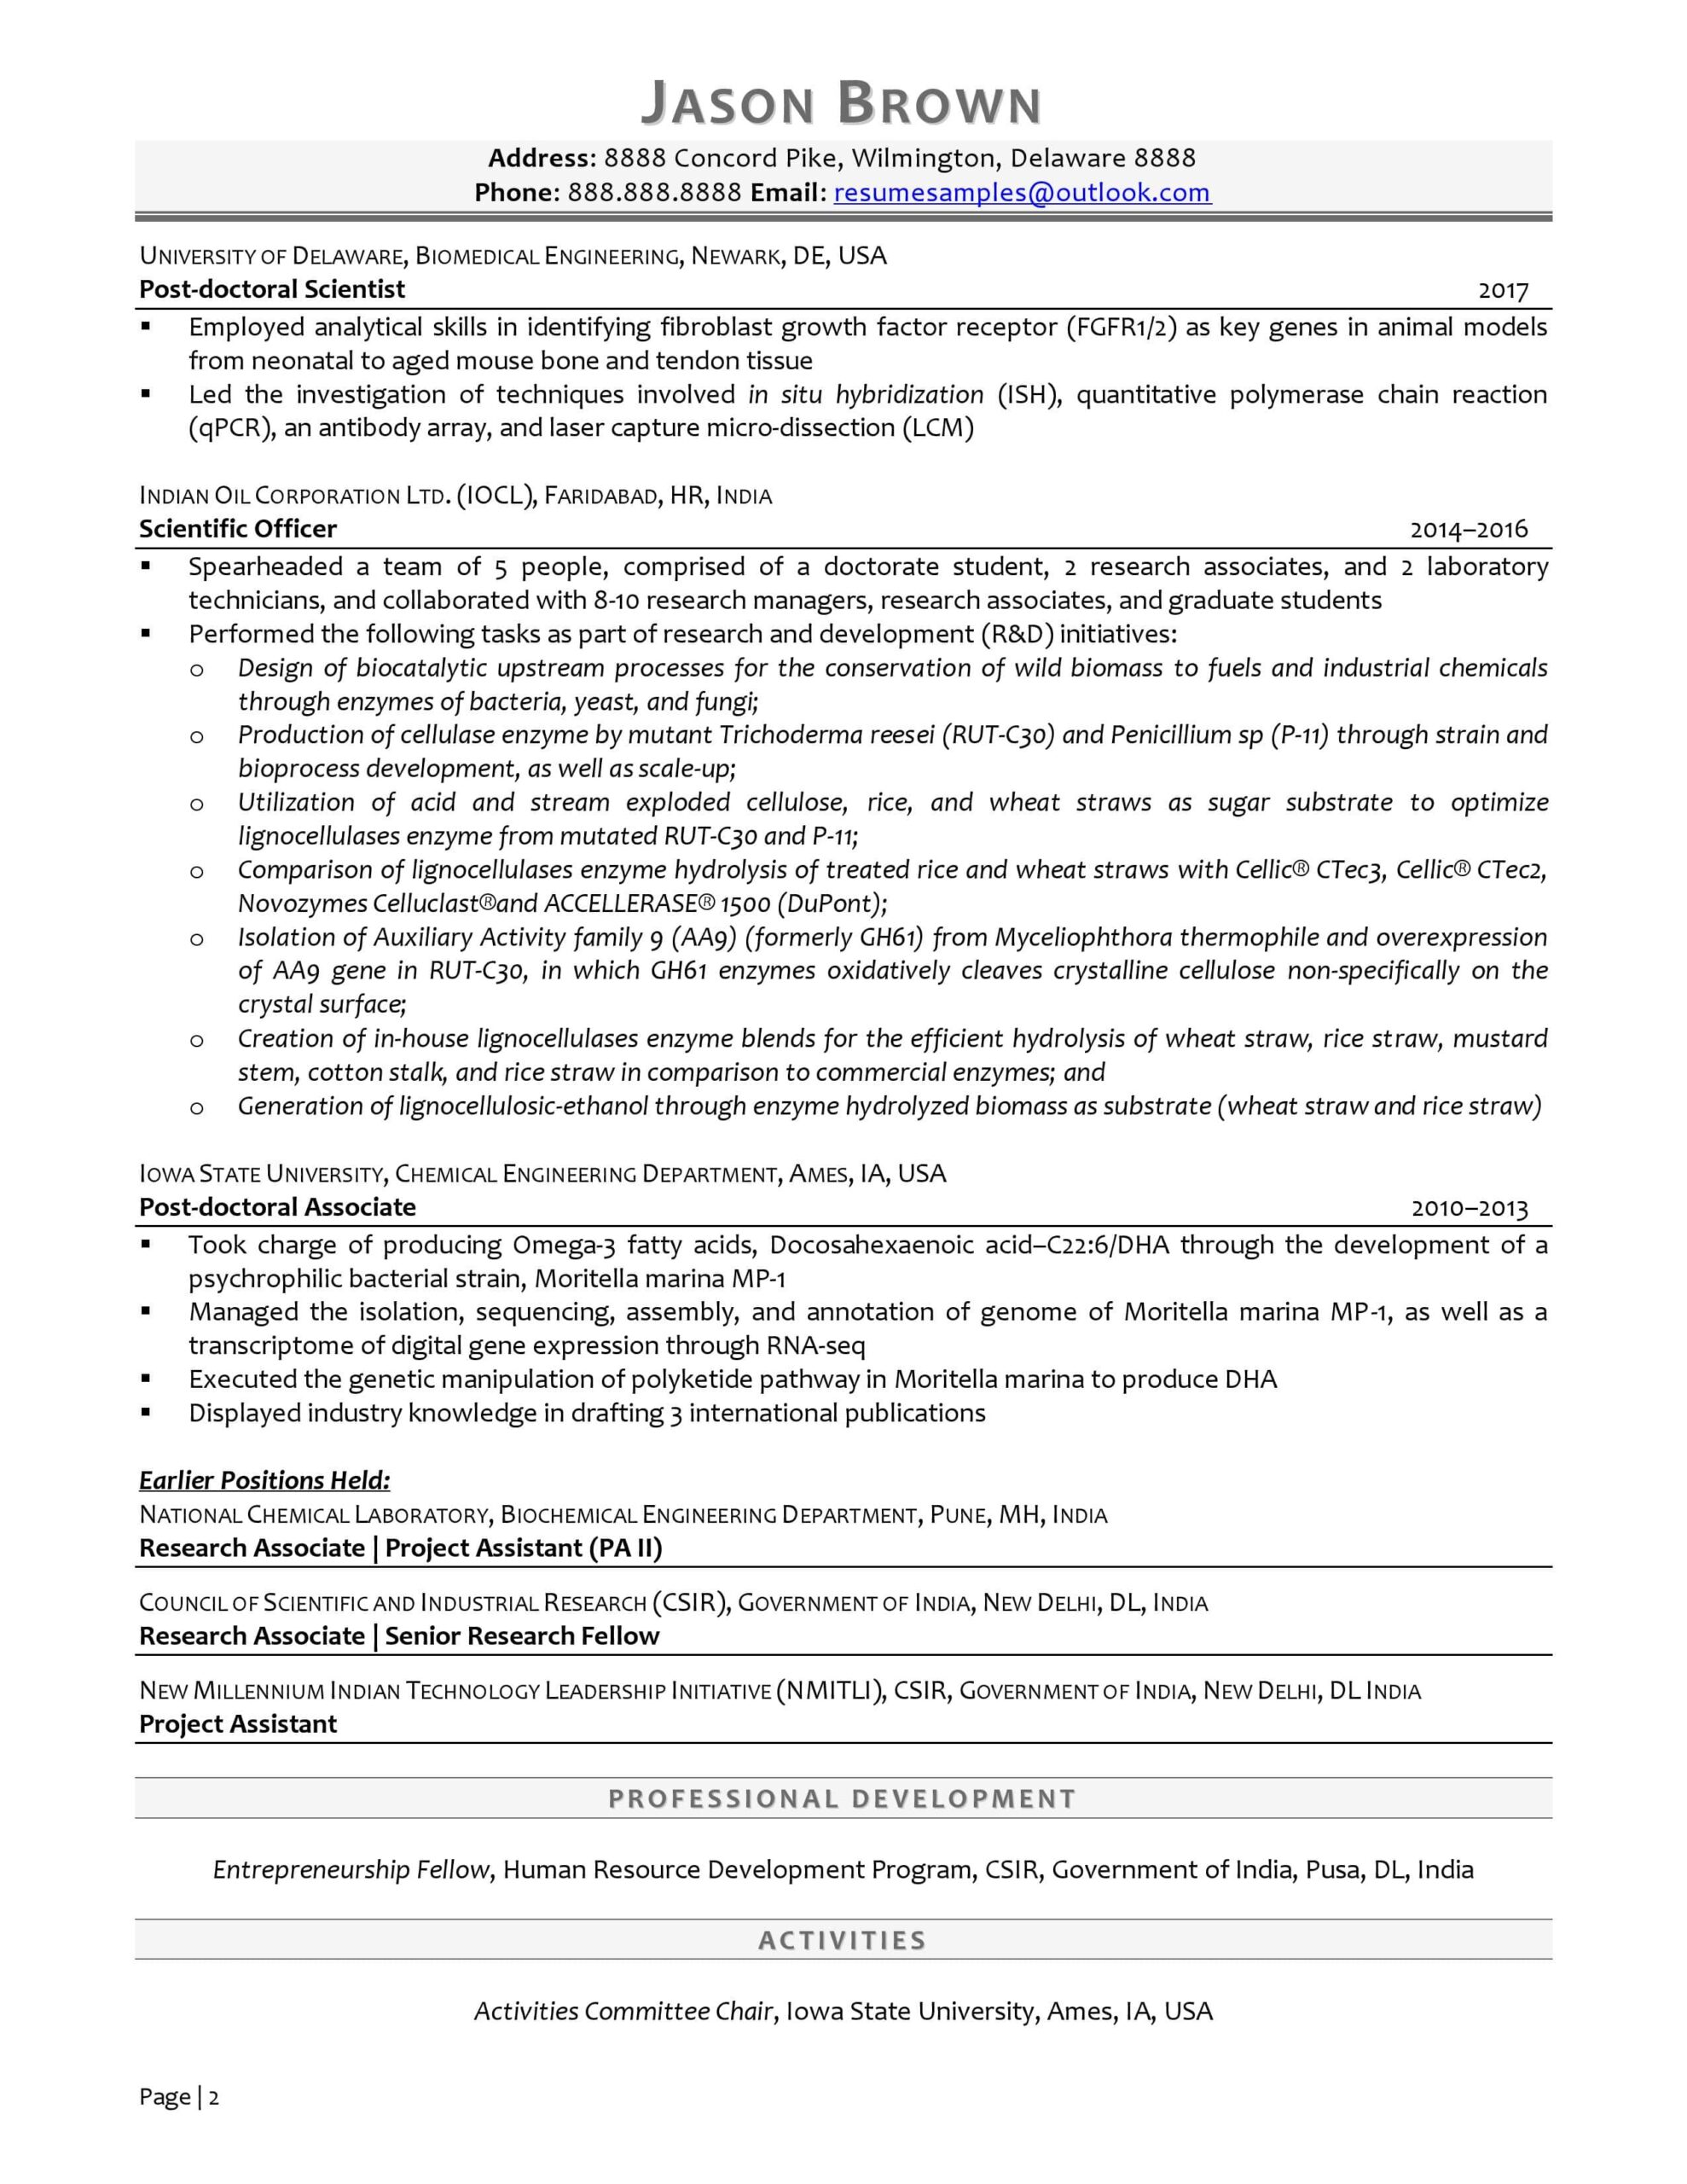 resume samples for research and development